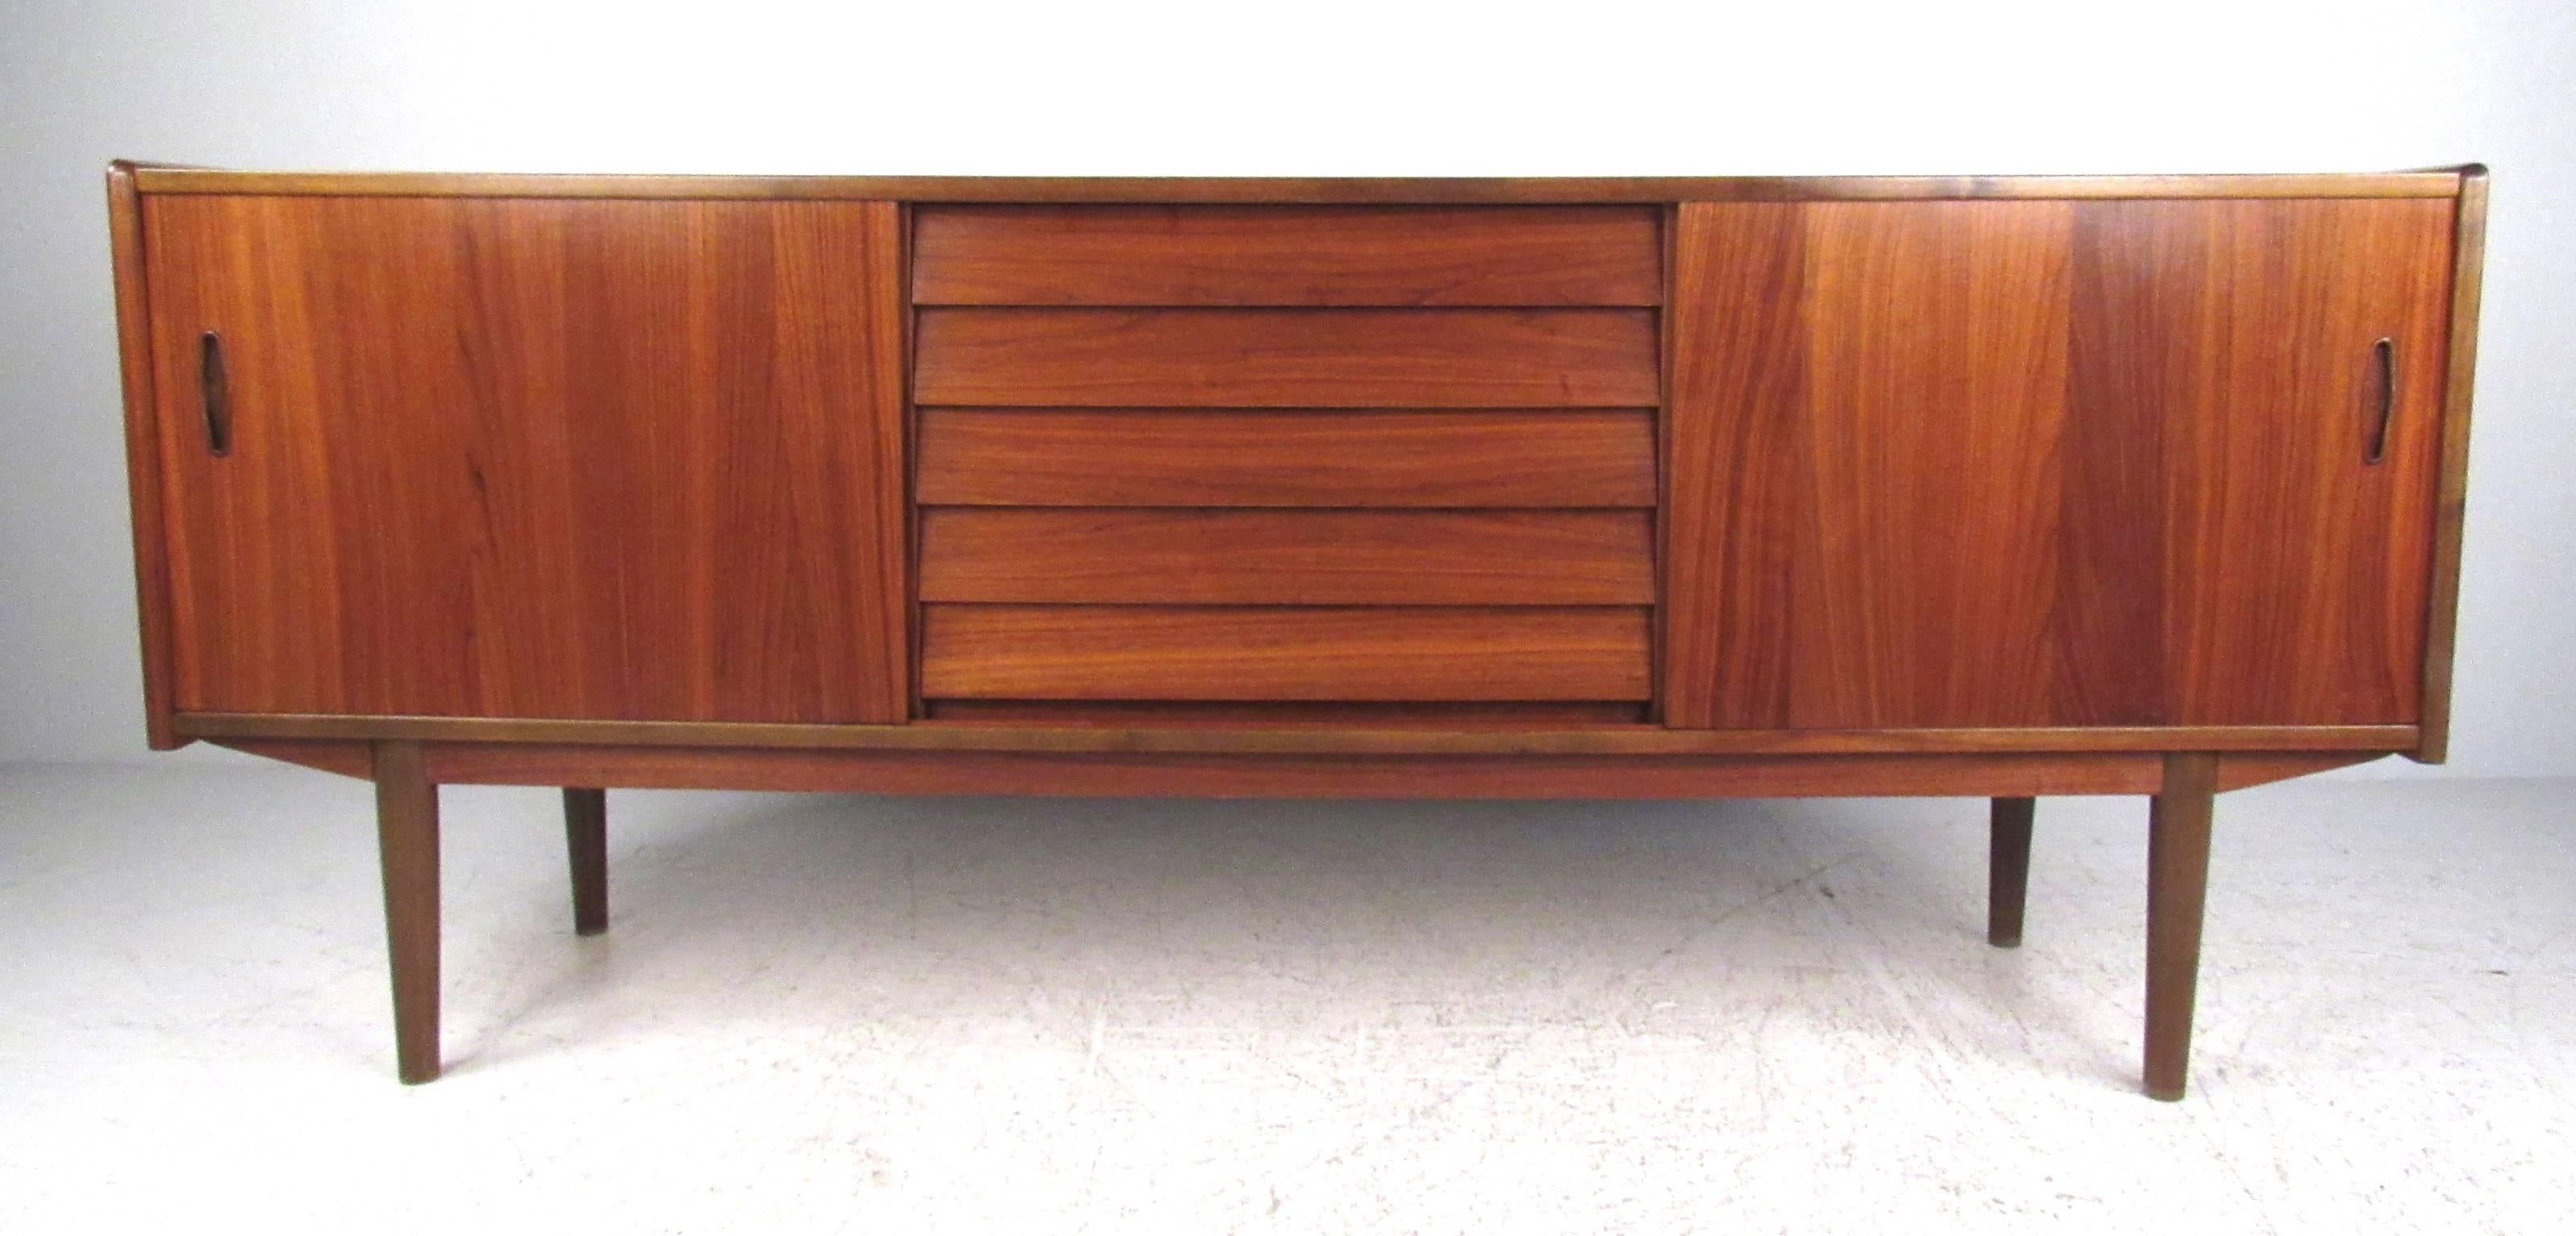 Vintage teak sideboard featuring five drawers and two sliding doors with adjustable shelves. Elegant Swedish modern sideboard features storage for dining room or use as a mid-century style TV or office console. Stylish teak finish adds vintage